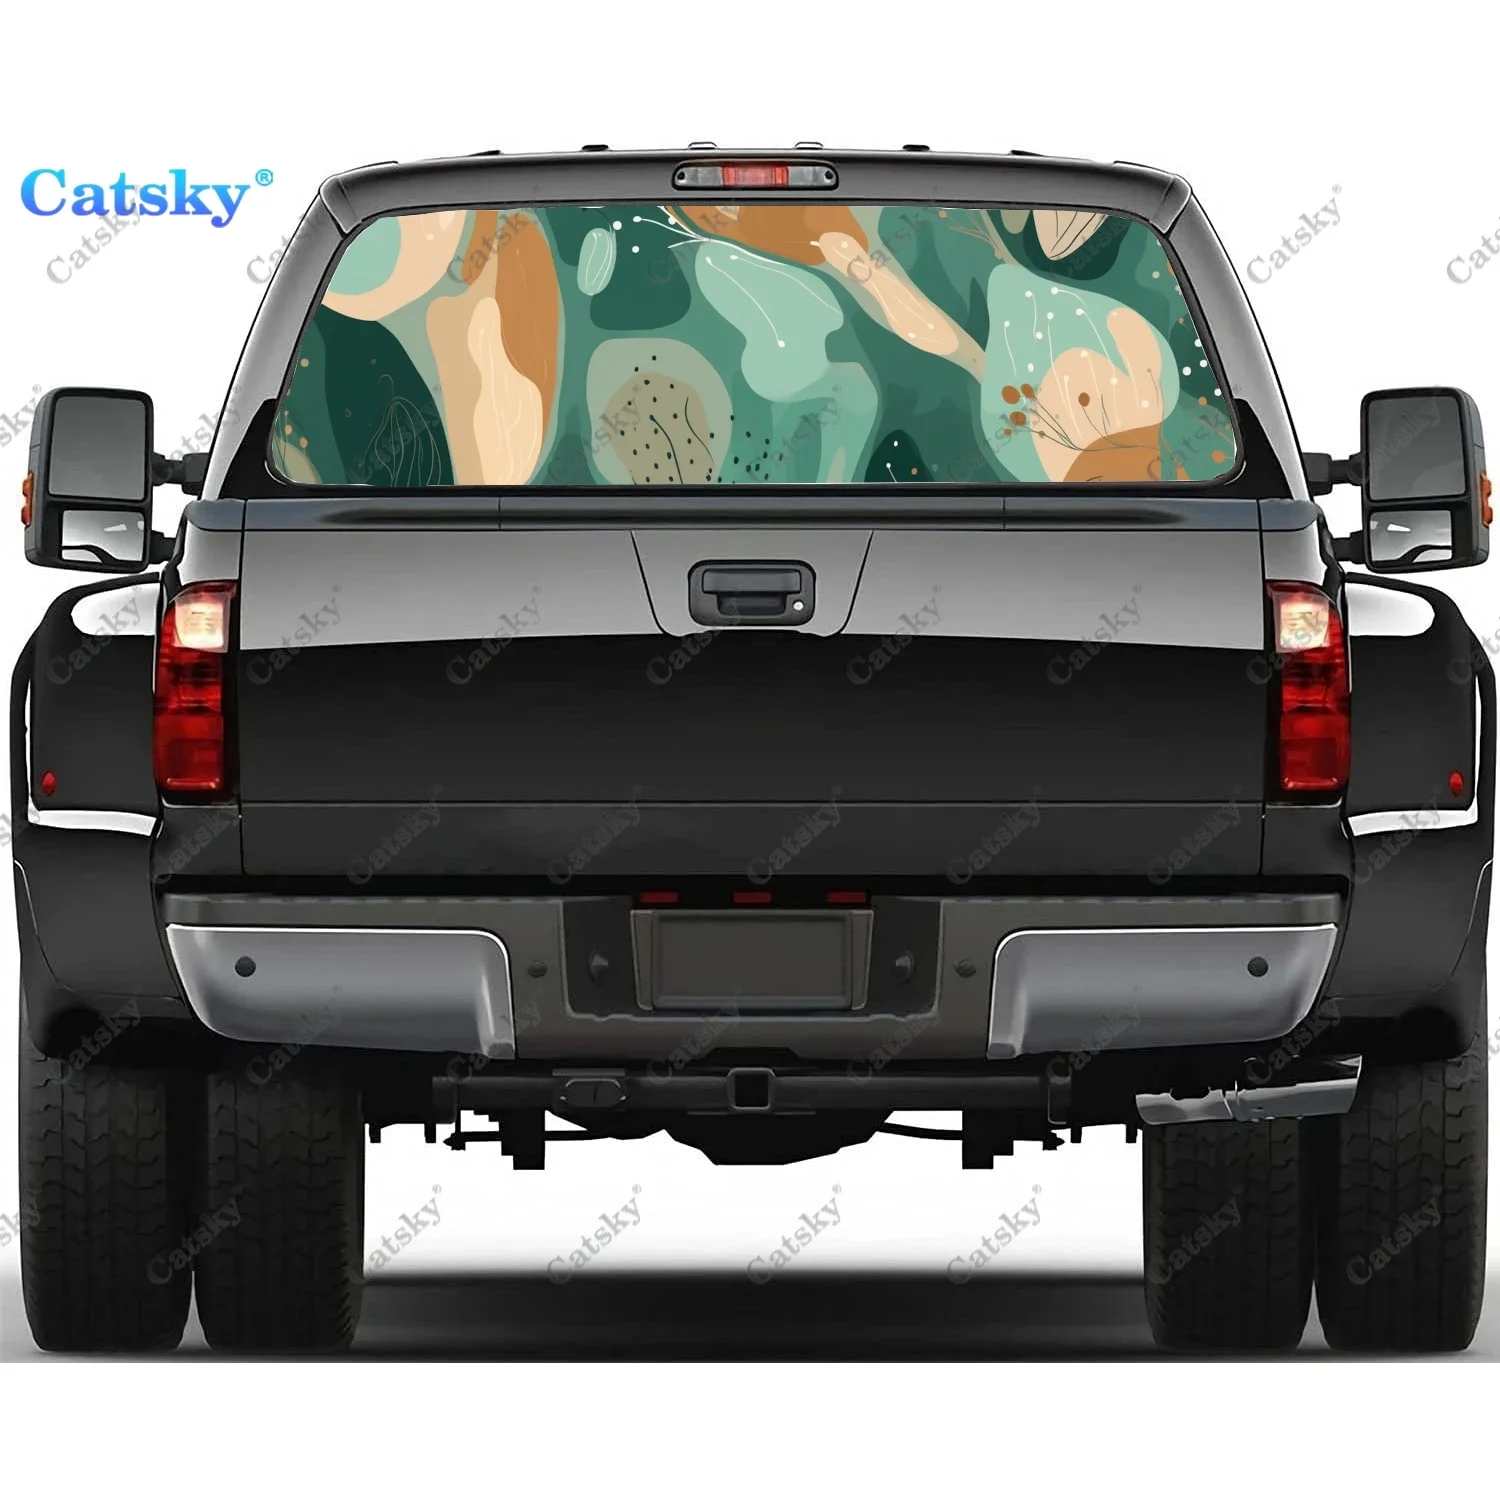 

Nature Abstract Organic Shapes Rear Window Decal Fit Pickup,Truck,Car Universal See Through Perforated Back Window Vinyl Sticker